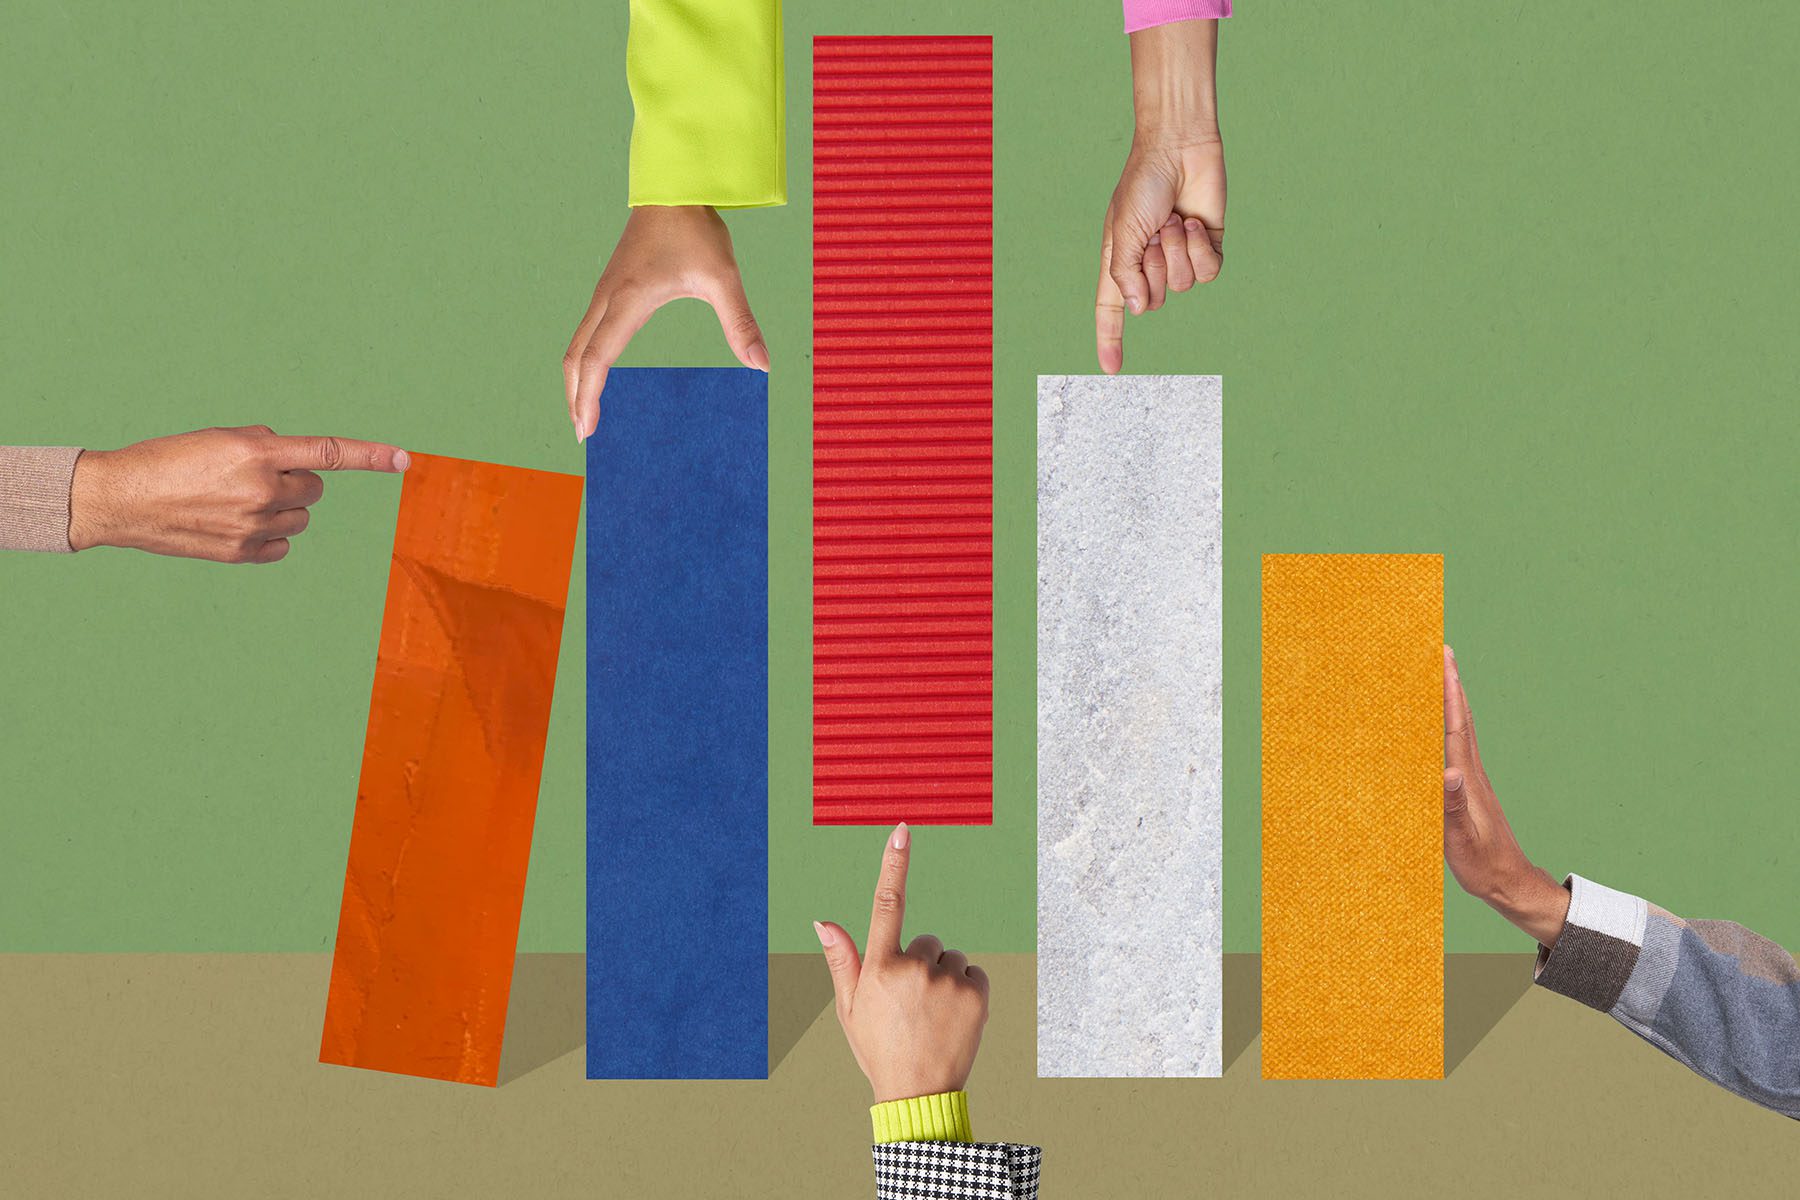 Colourful image of hands manipulating columns of a bar graph.